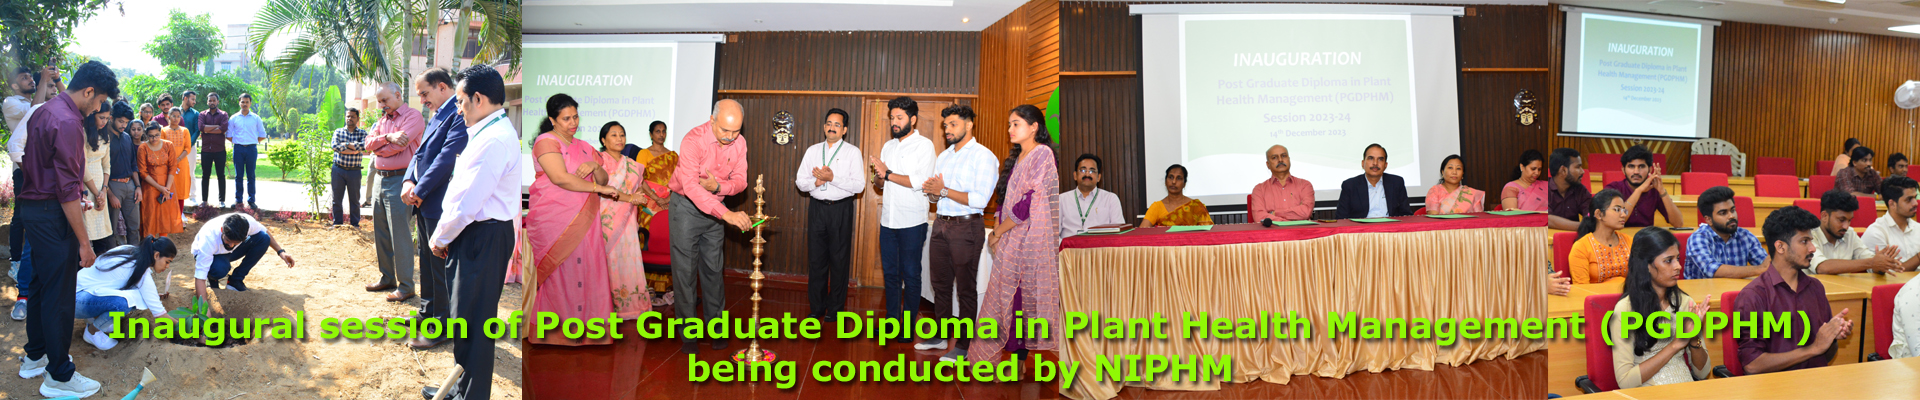 Inaugural session of PGDPHM being conducted by NIPHM